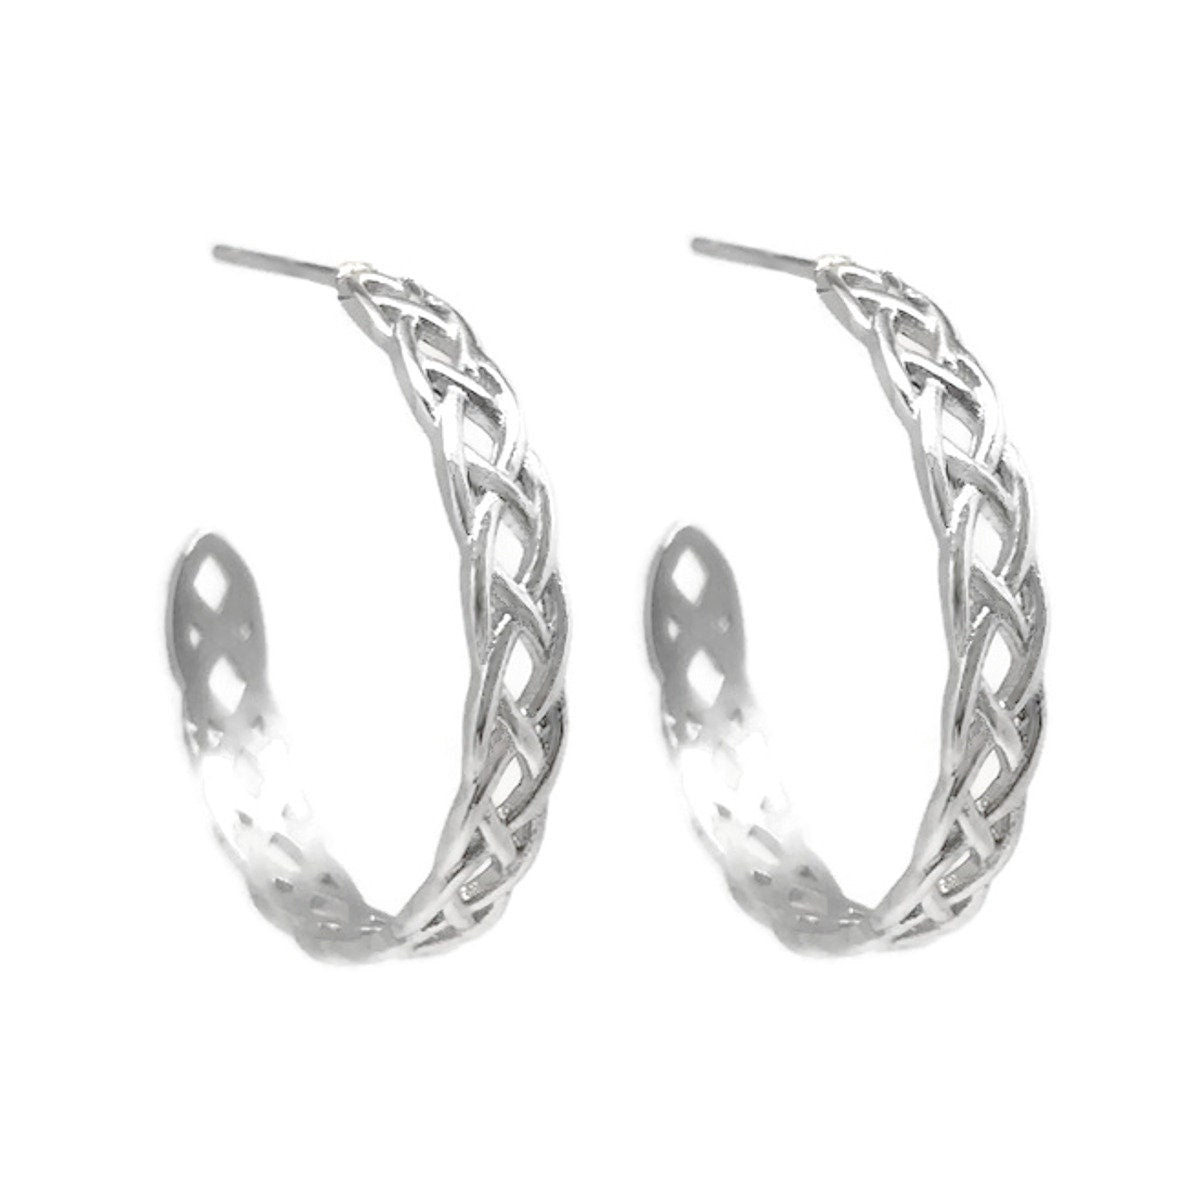 Braided Hoop Earrings, Stainless Steel, Irish Jewelry for Women, Gift Ideas For Sister, Bridesmaid Gift, Medium, Round